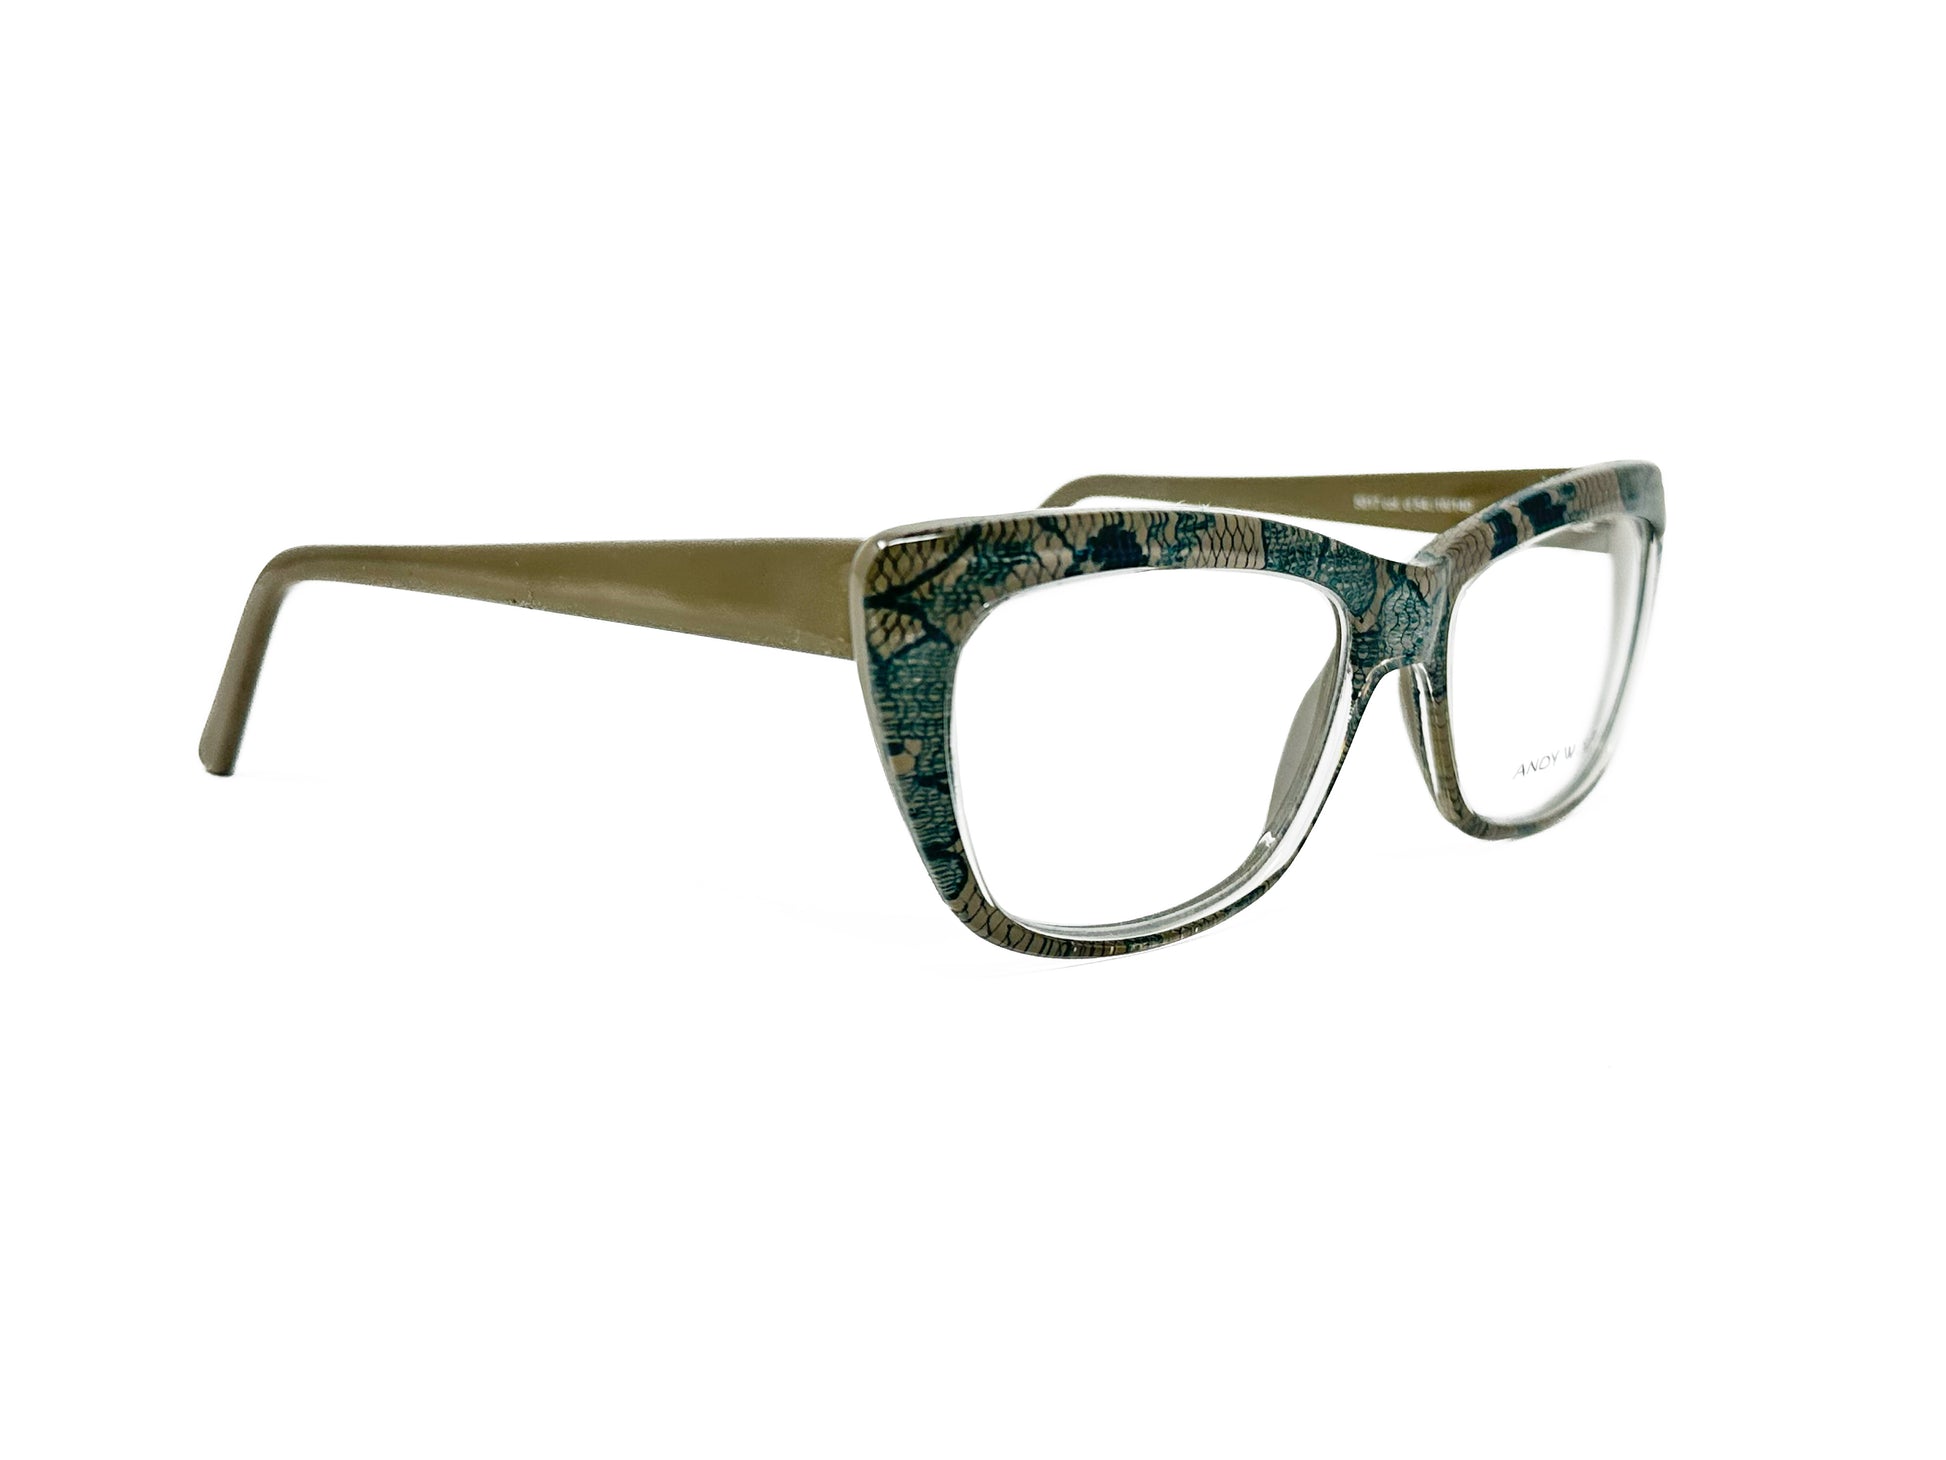 Andy Wolfe acetate, rectangular, cat-eye optical frame. Model: 5017. Color: D- Dark green and olive with black snake skin pattern. Side view.